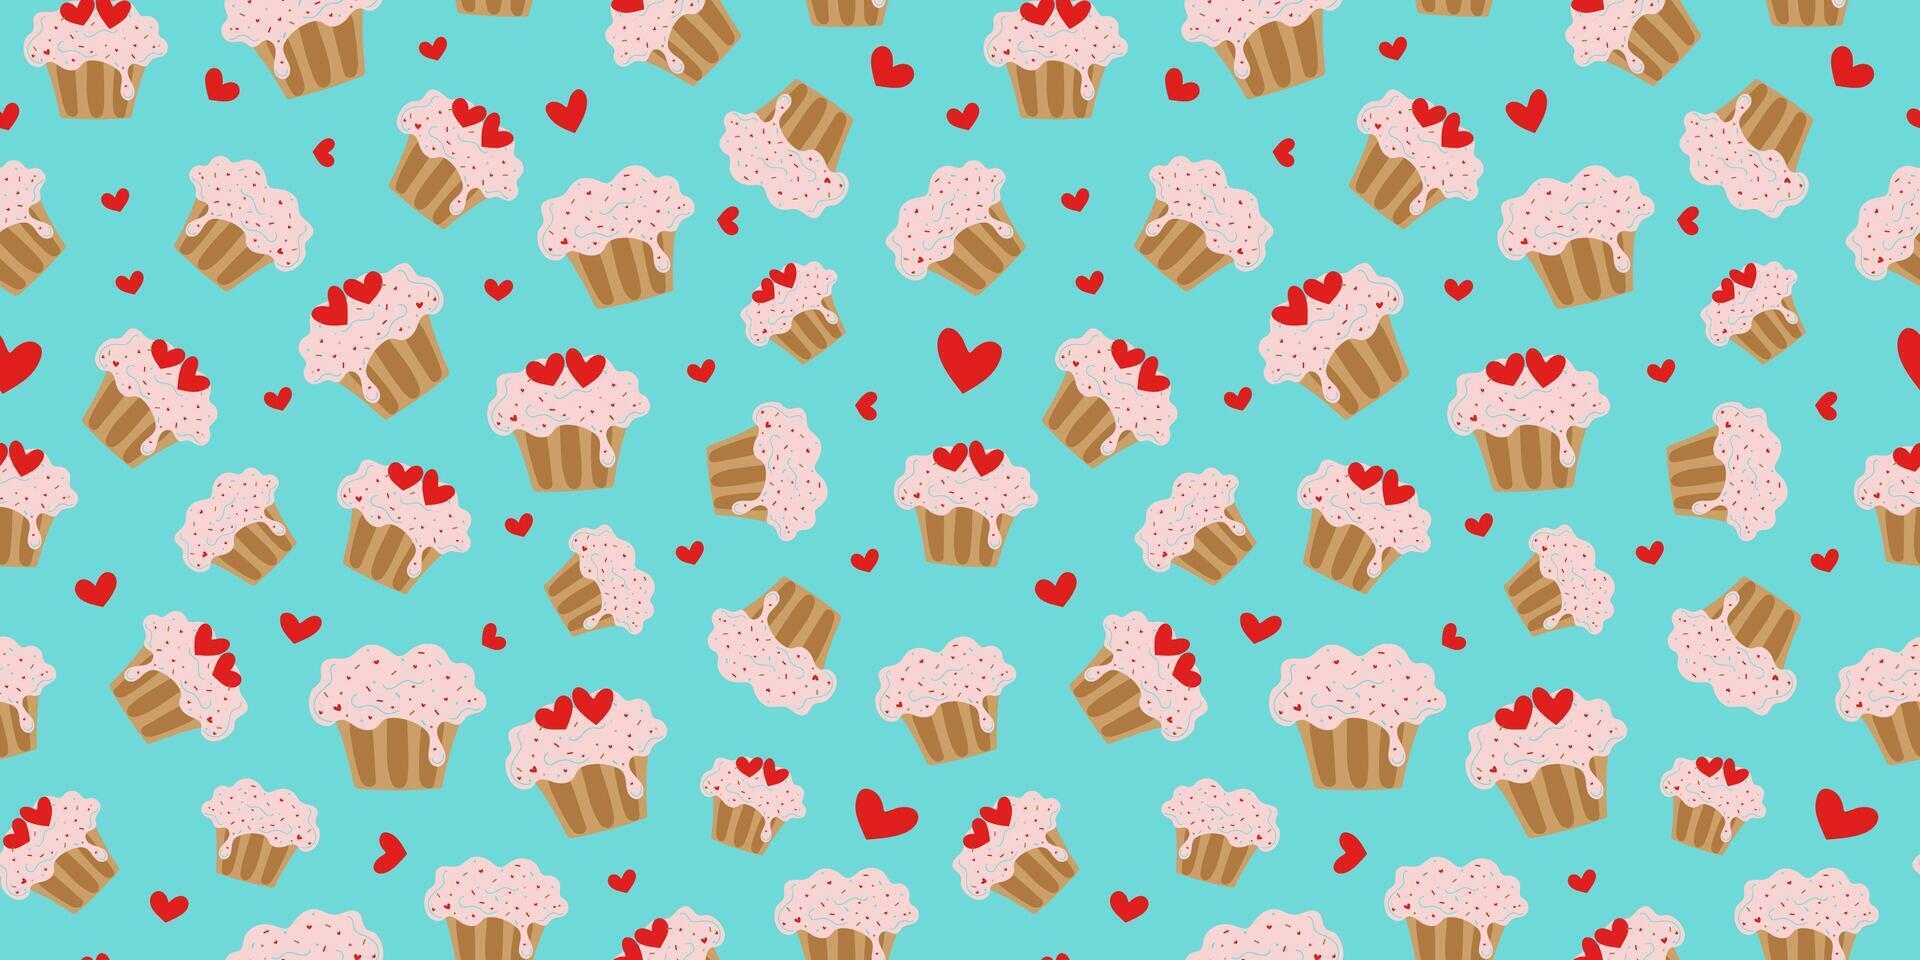 Pattern Cake and hearts, doodle style. Confectionery, baked goods. Delicate cream cake. Valentine's day, wedding, decor. Packaging design, wallpaper. Vector background.